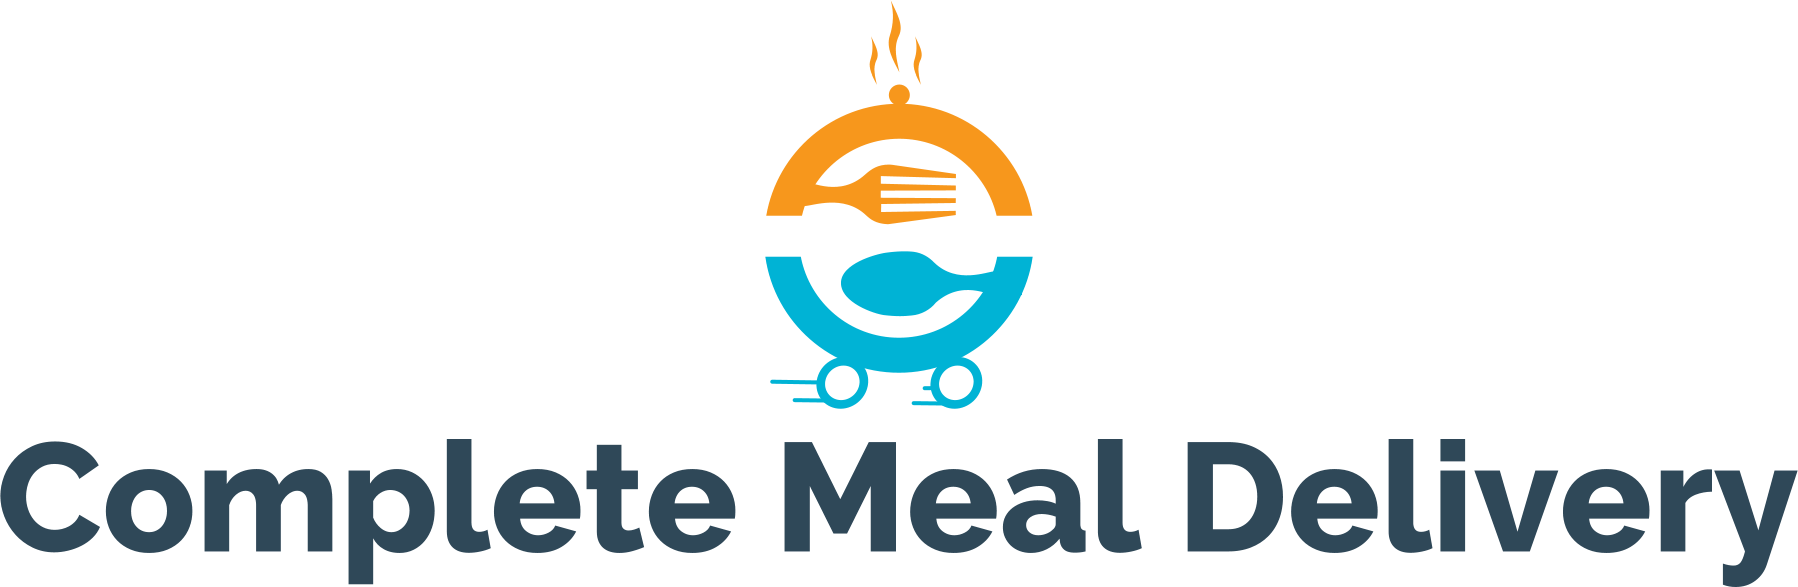 Compare - Complete Meal Delivery